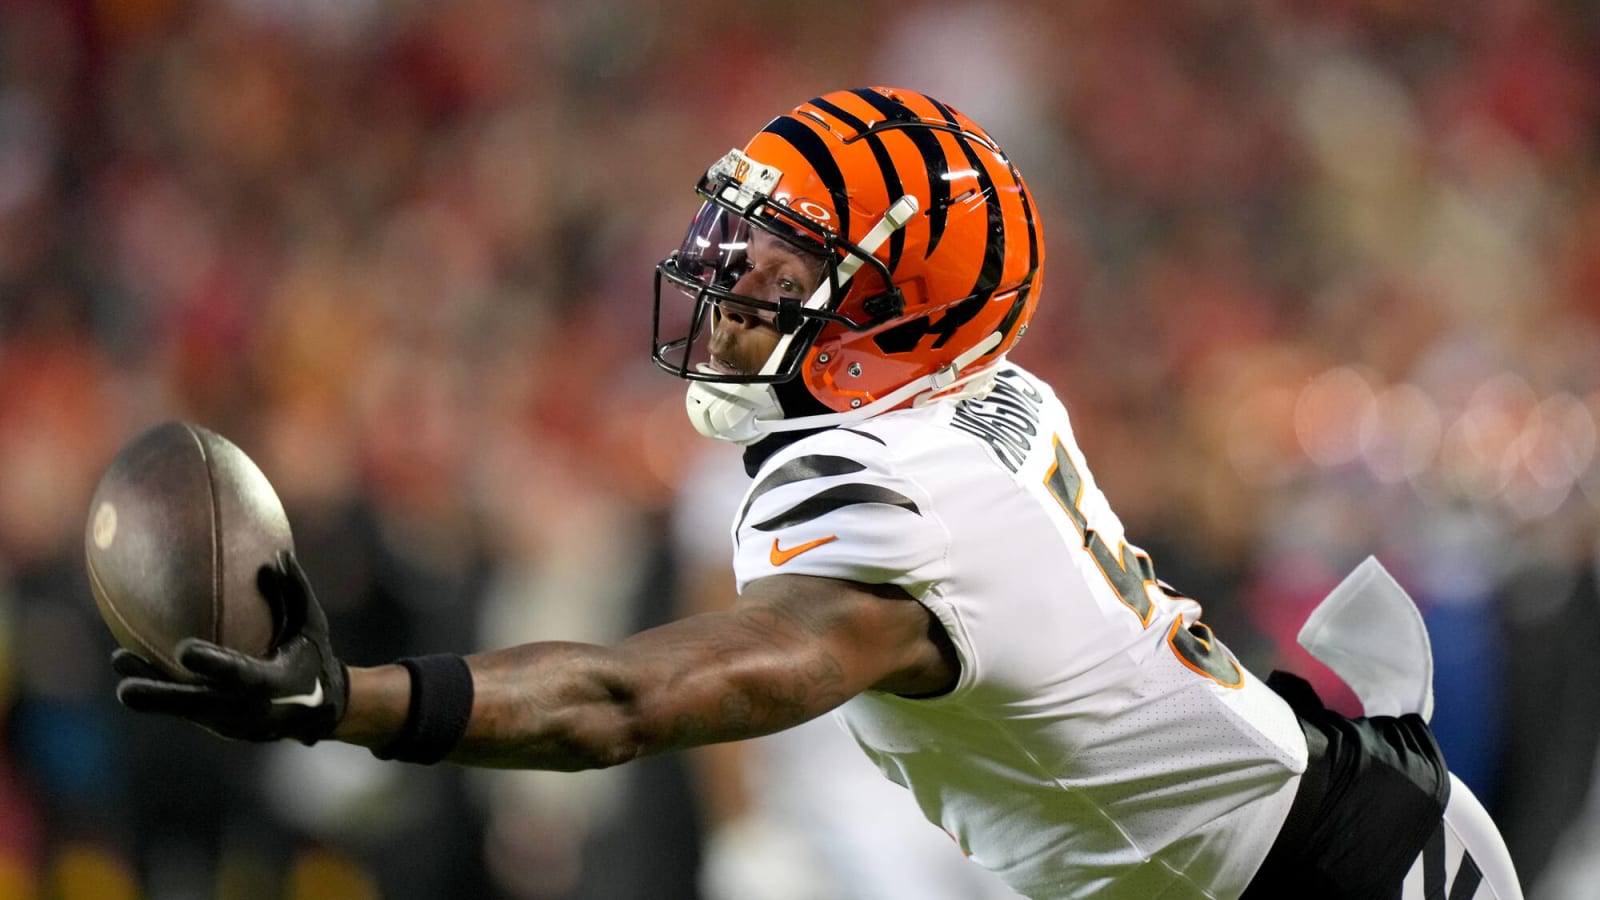 NFL insider makes stunning comments on Bengals offensive star